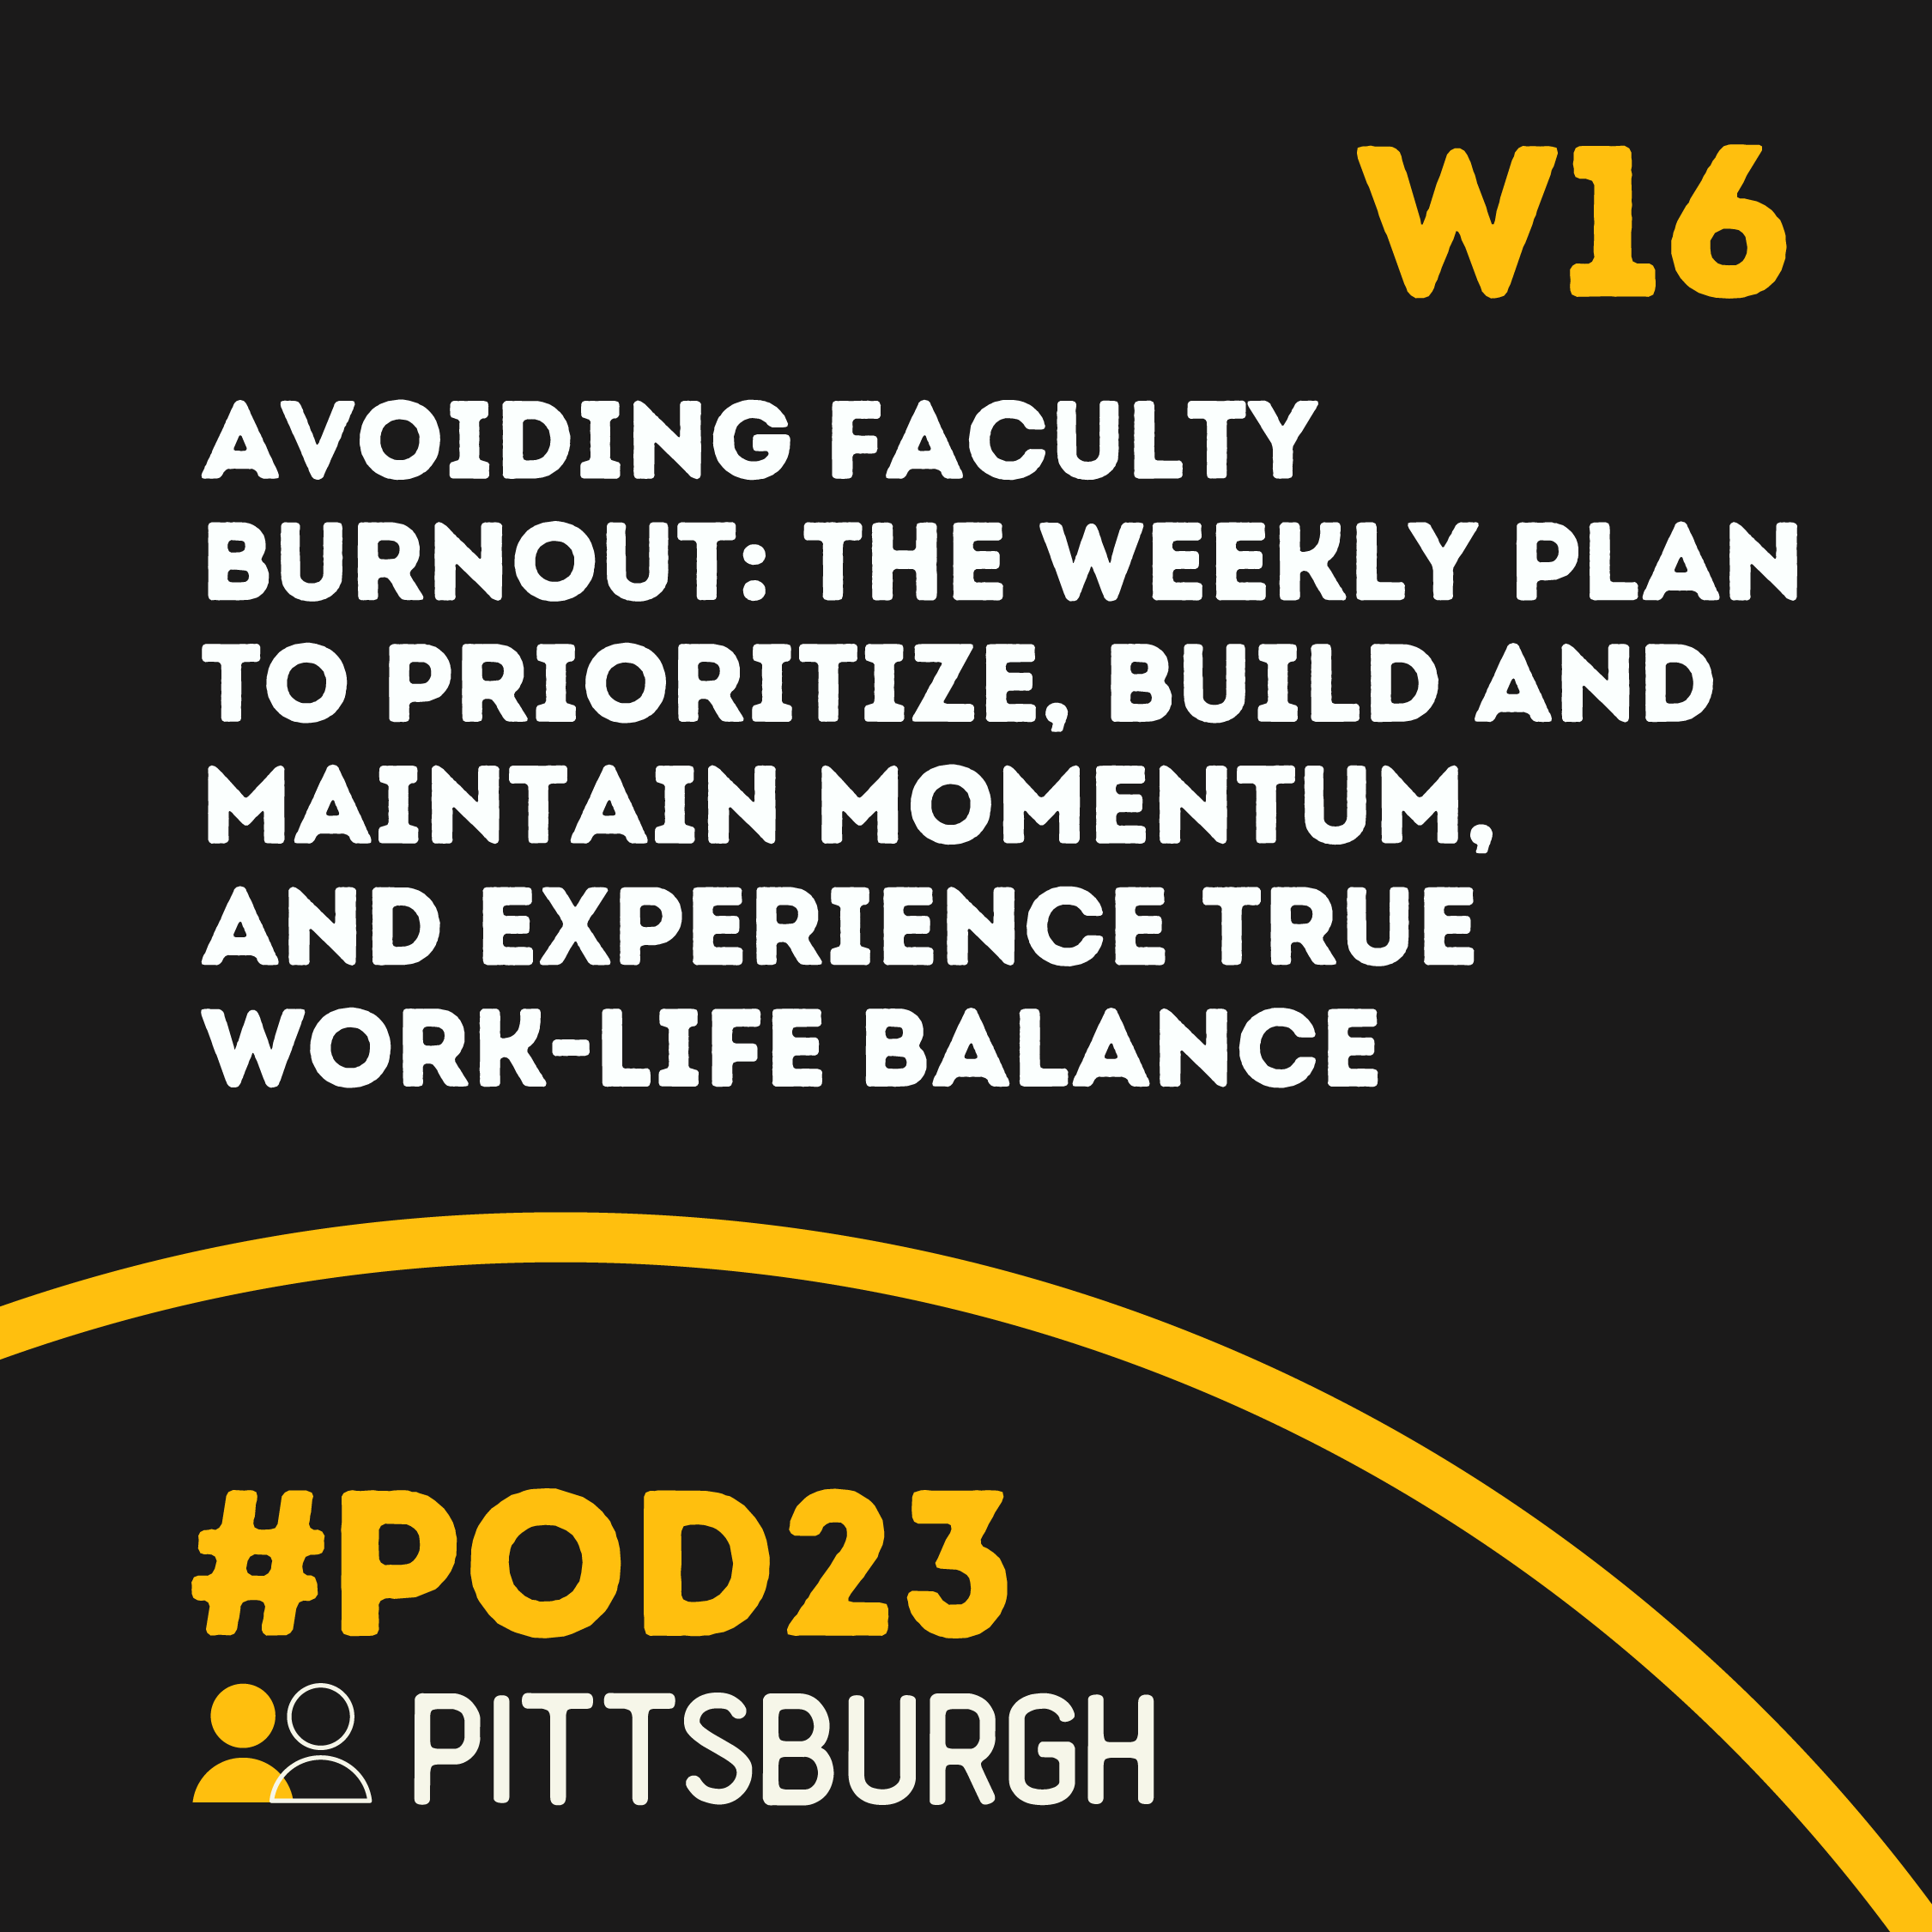 #POD23 W16: Avoiding Faculty Burnout: The Weekly Plan to Prioritize, Build and Maintain Momentum, and Experience True Work-Life Balance